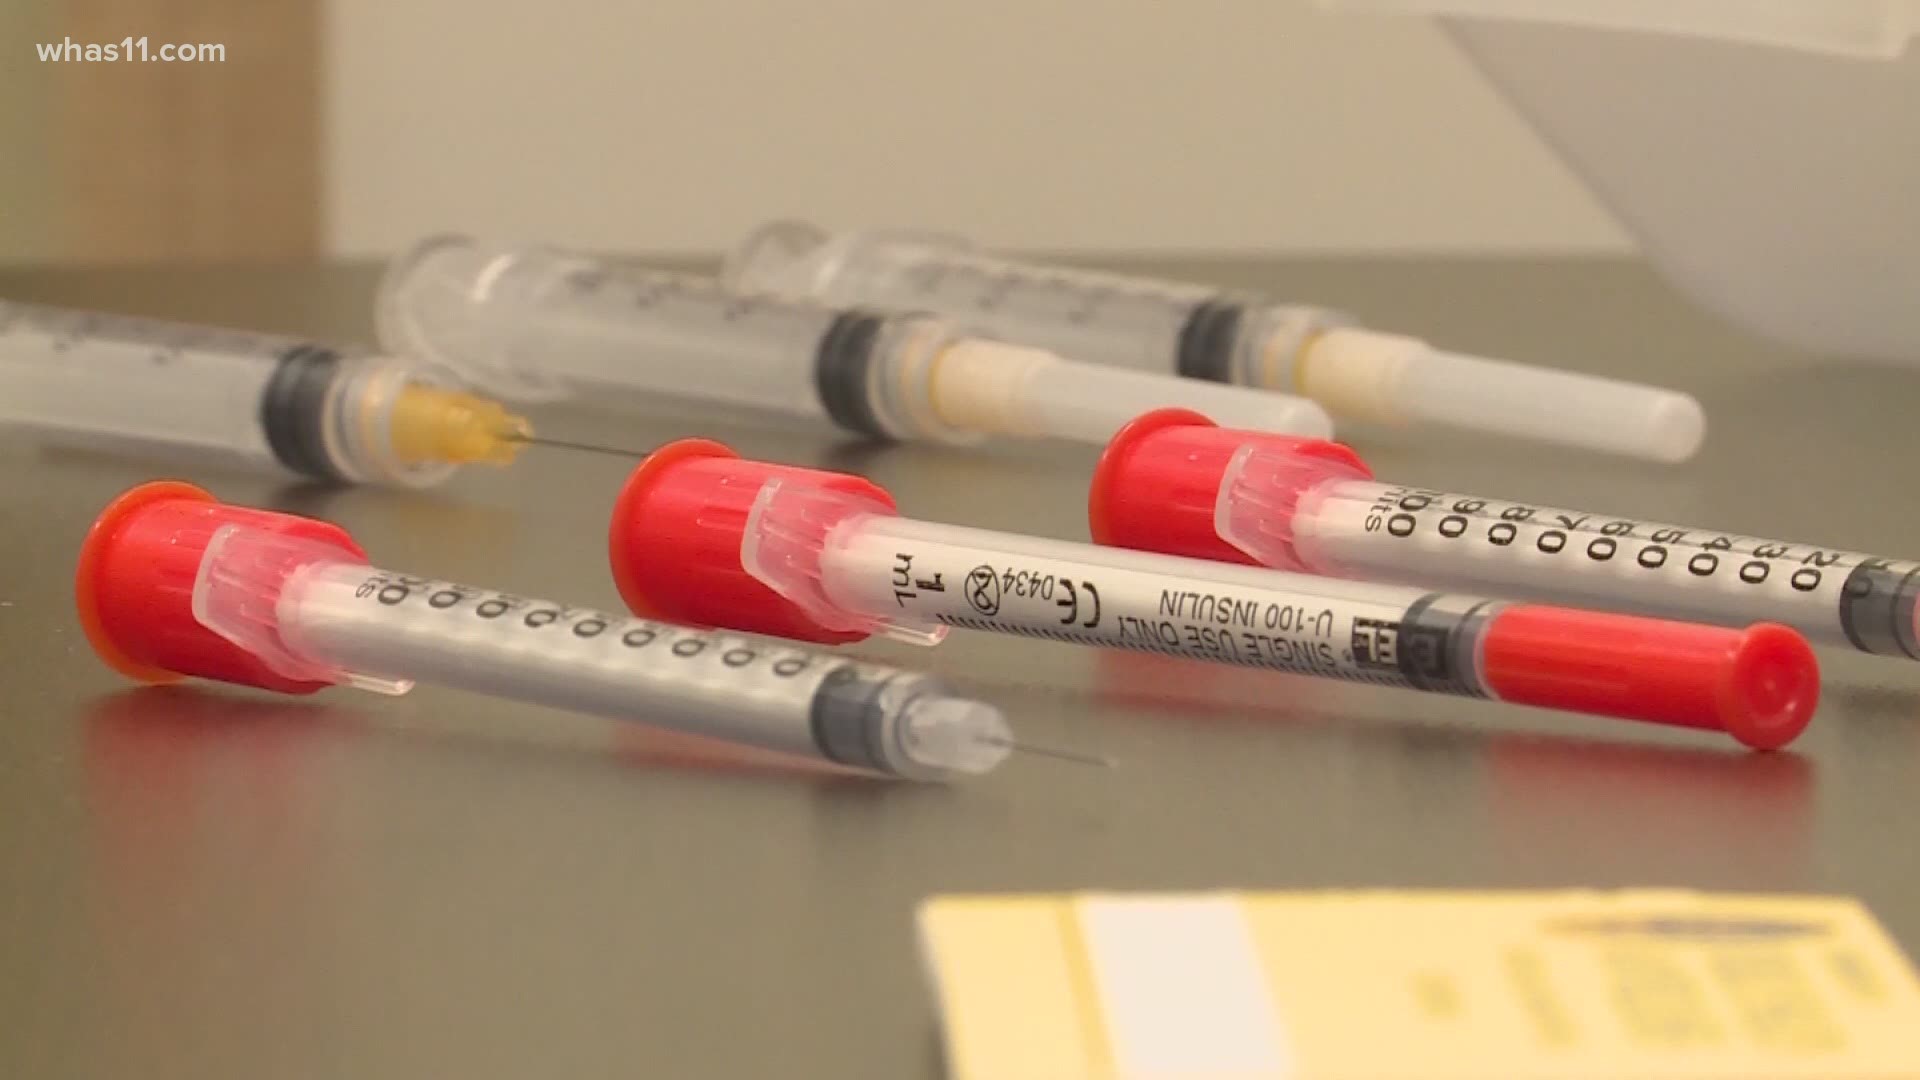 The syringe service program started in 2015--the first of its kind in Indiana. It came after an HIV outbreak in Scott County.